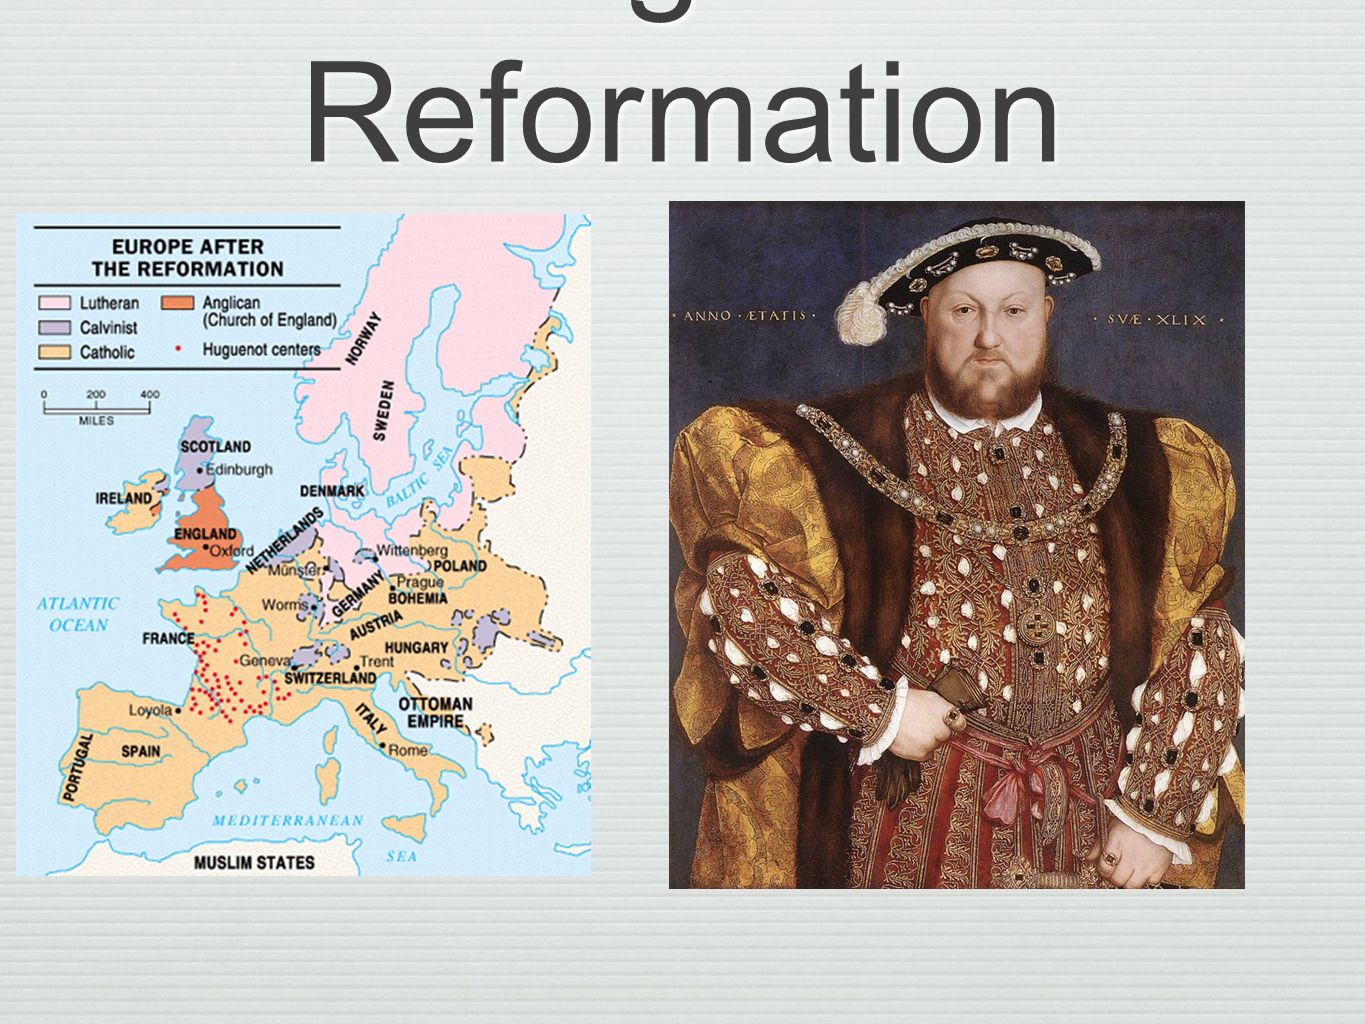 Impact of the english reformation and